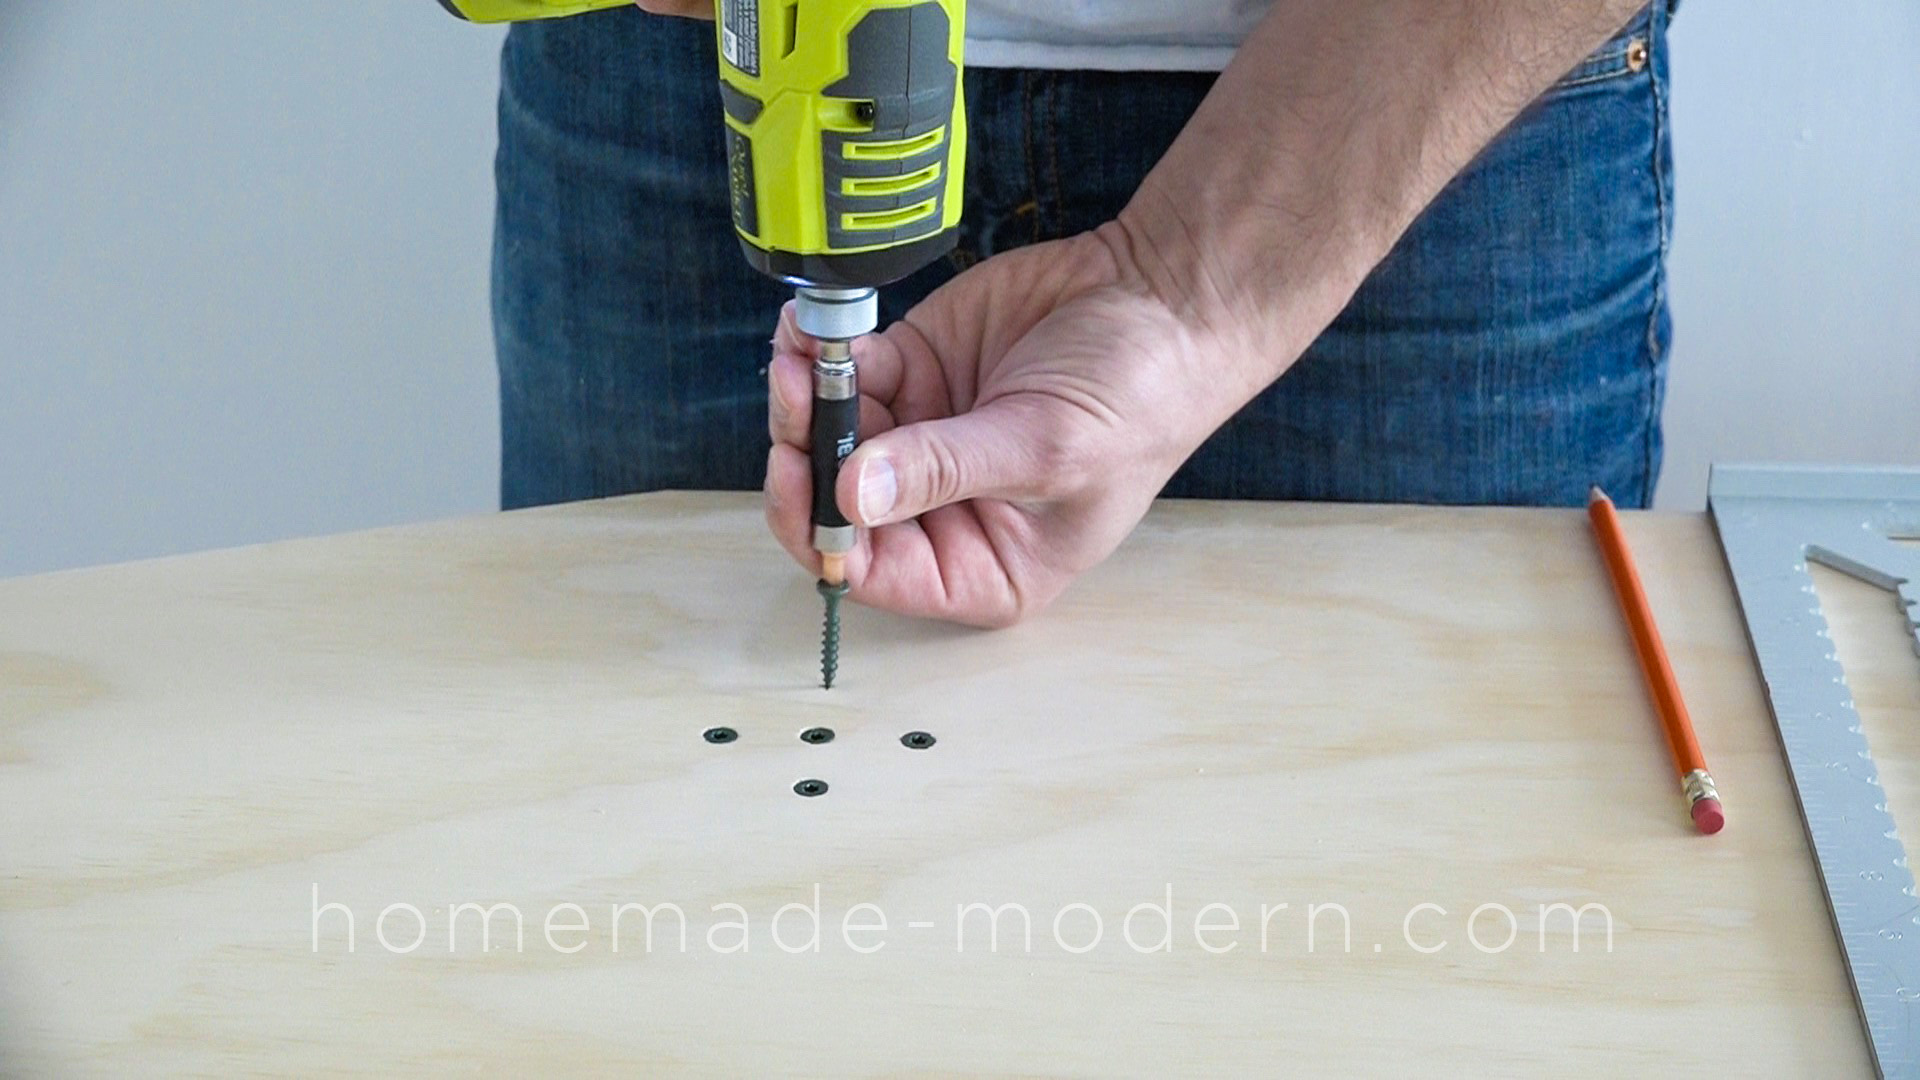 This DIY Plywood table is made out ¾” plywood from  Home Depot and does NOT require a CNC machine to make. Full instructions can be found at HomeMade-Modern.com